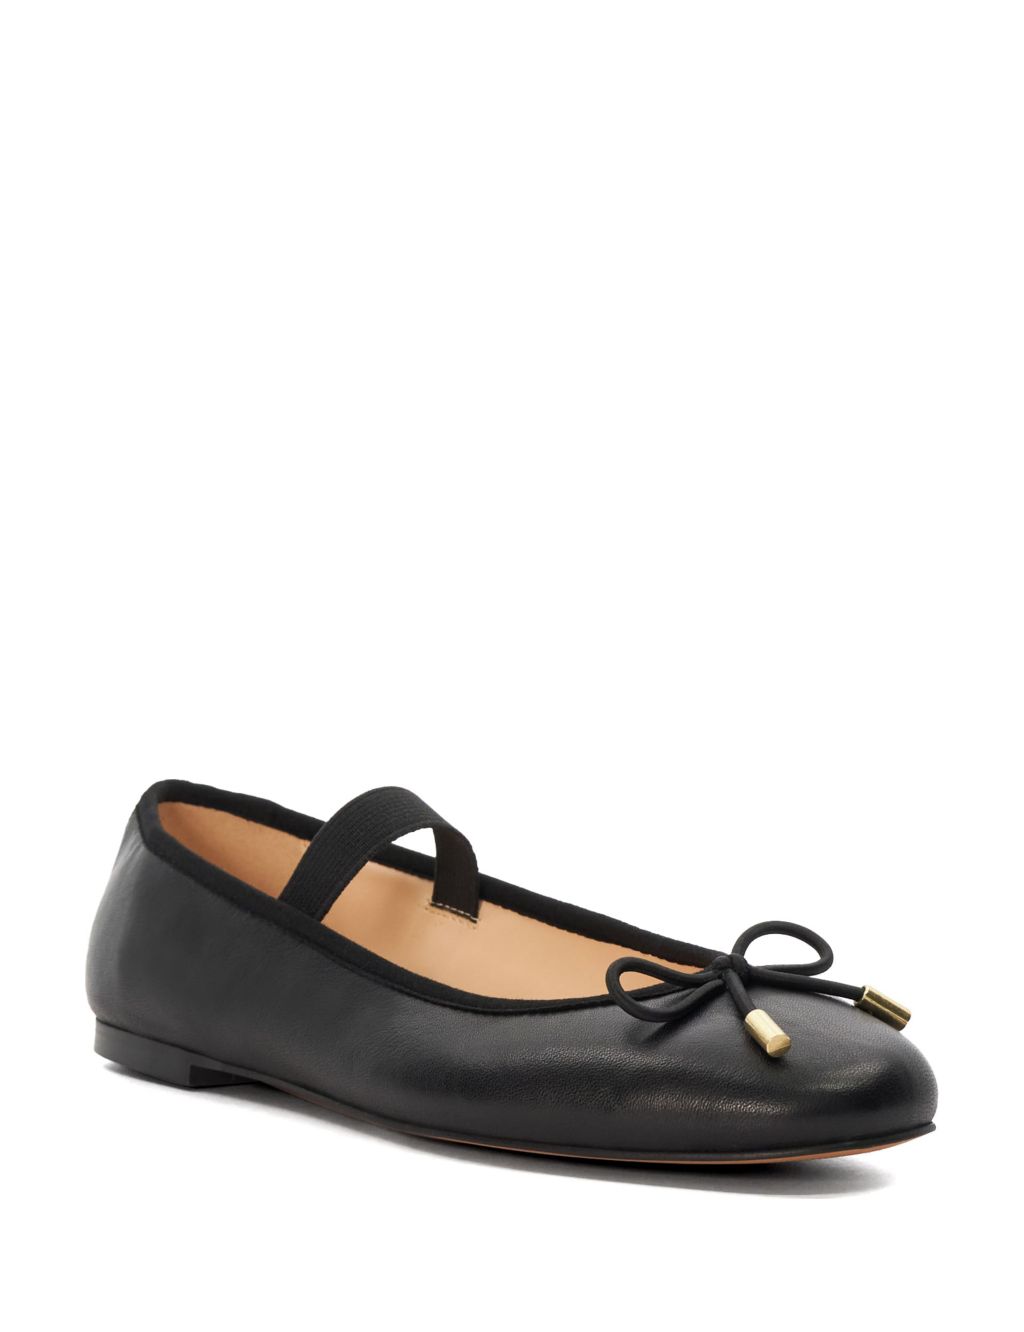 Leather Bow Flat Ballet Pumps 1 of 5